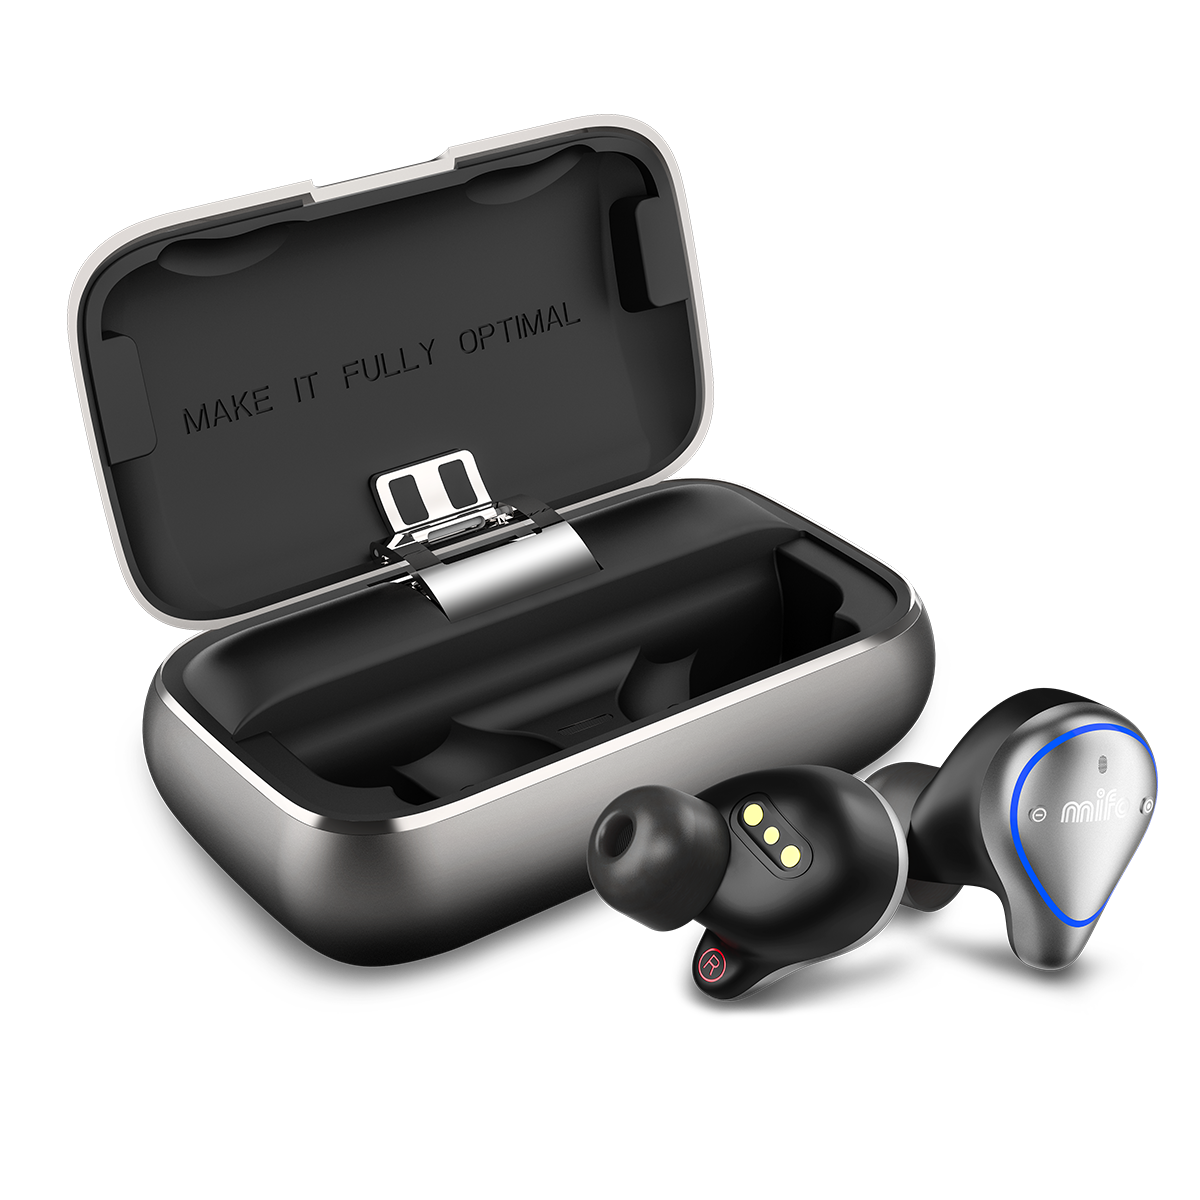 Mifo O5 Professional Earbuds and Charging Case - Best Wireless Earbuds with IPX7